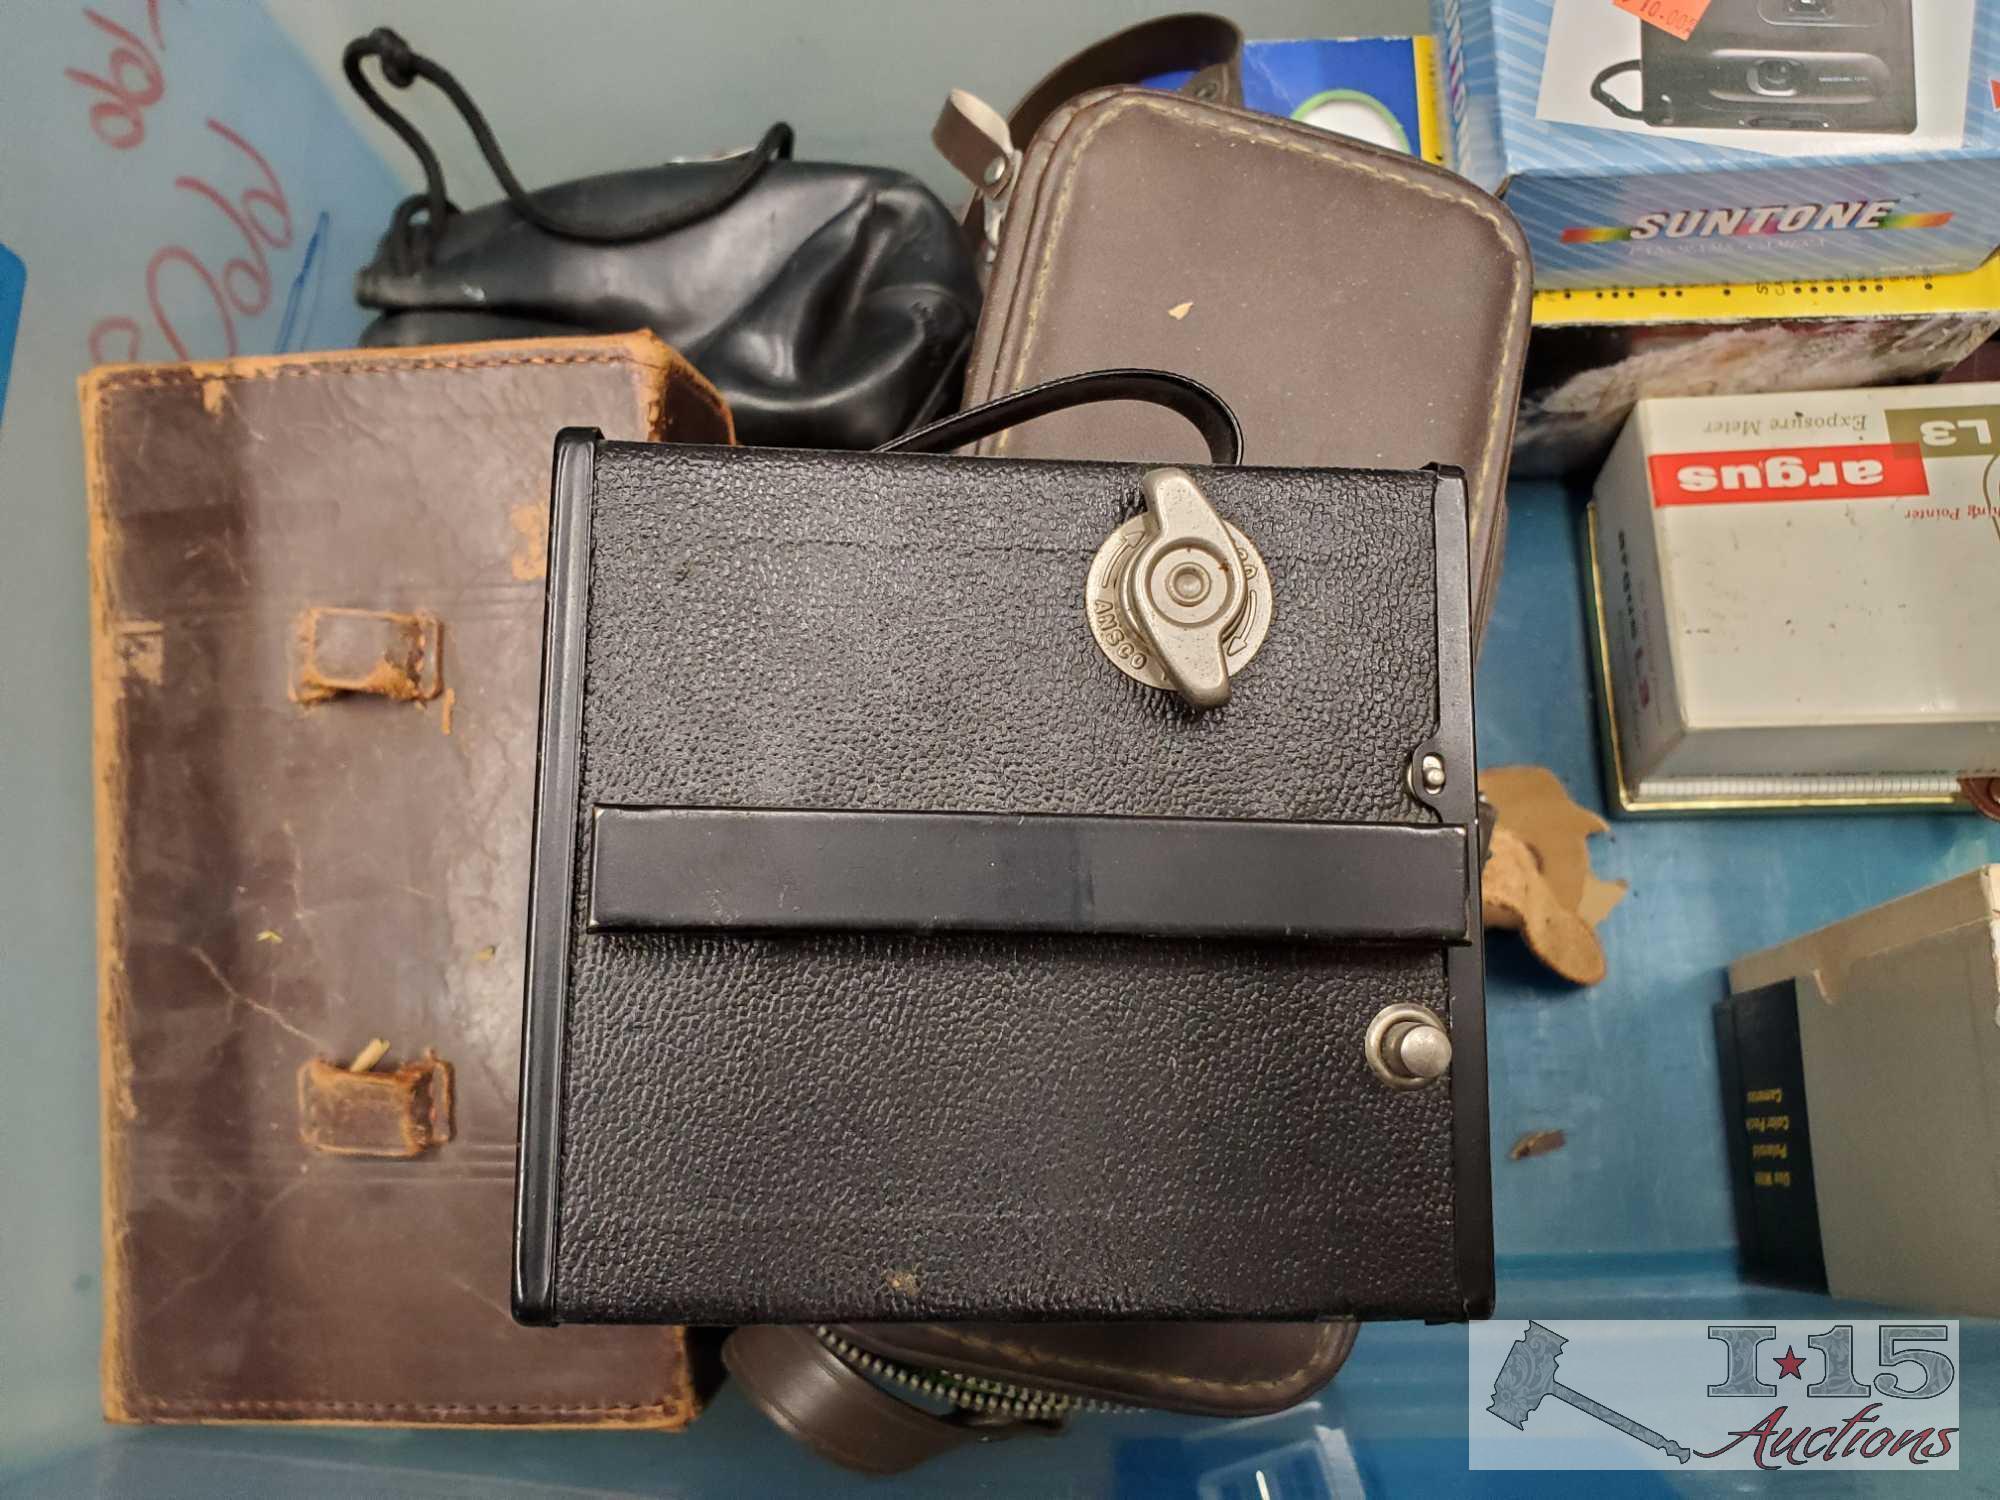 Misc. Vintage Cameras and Cases, and other Photography items